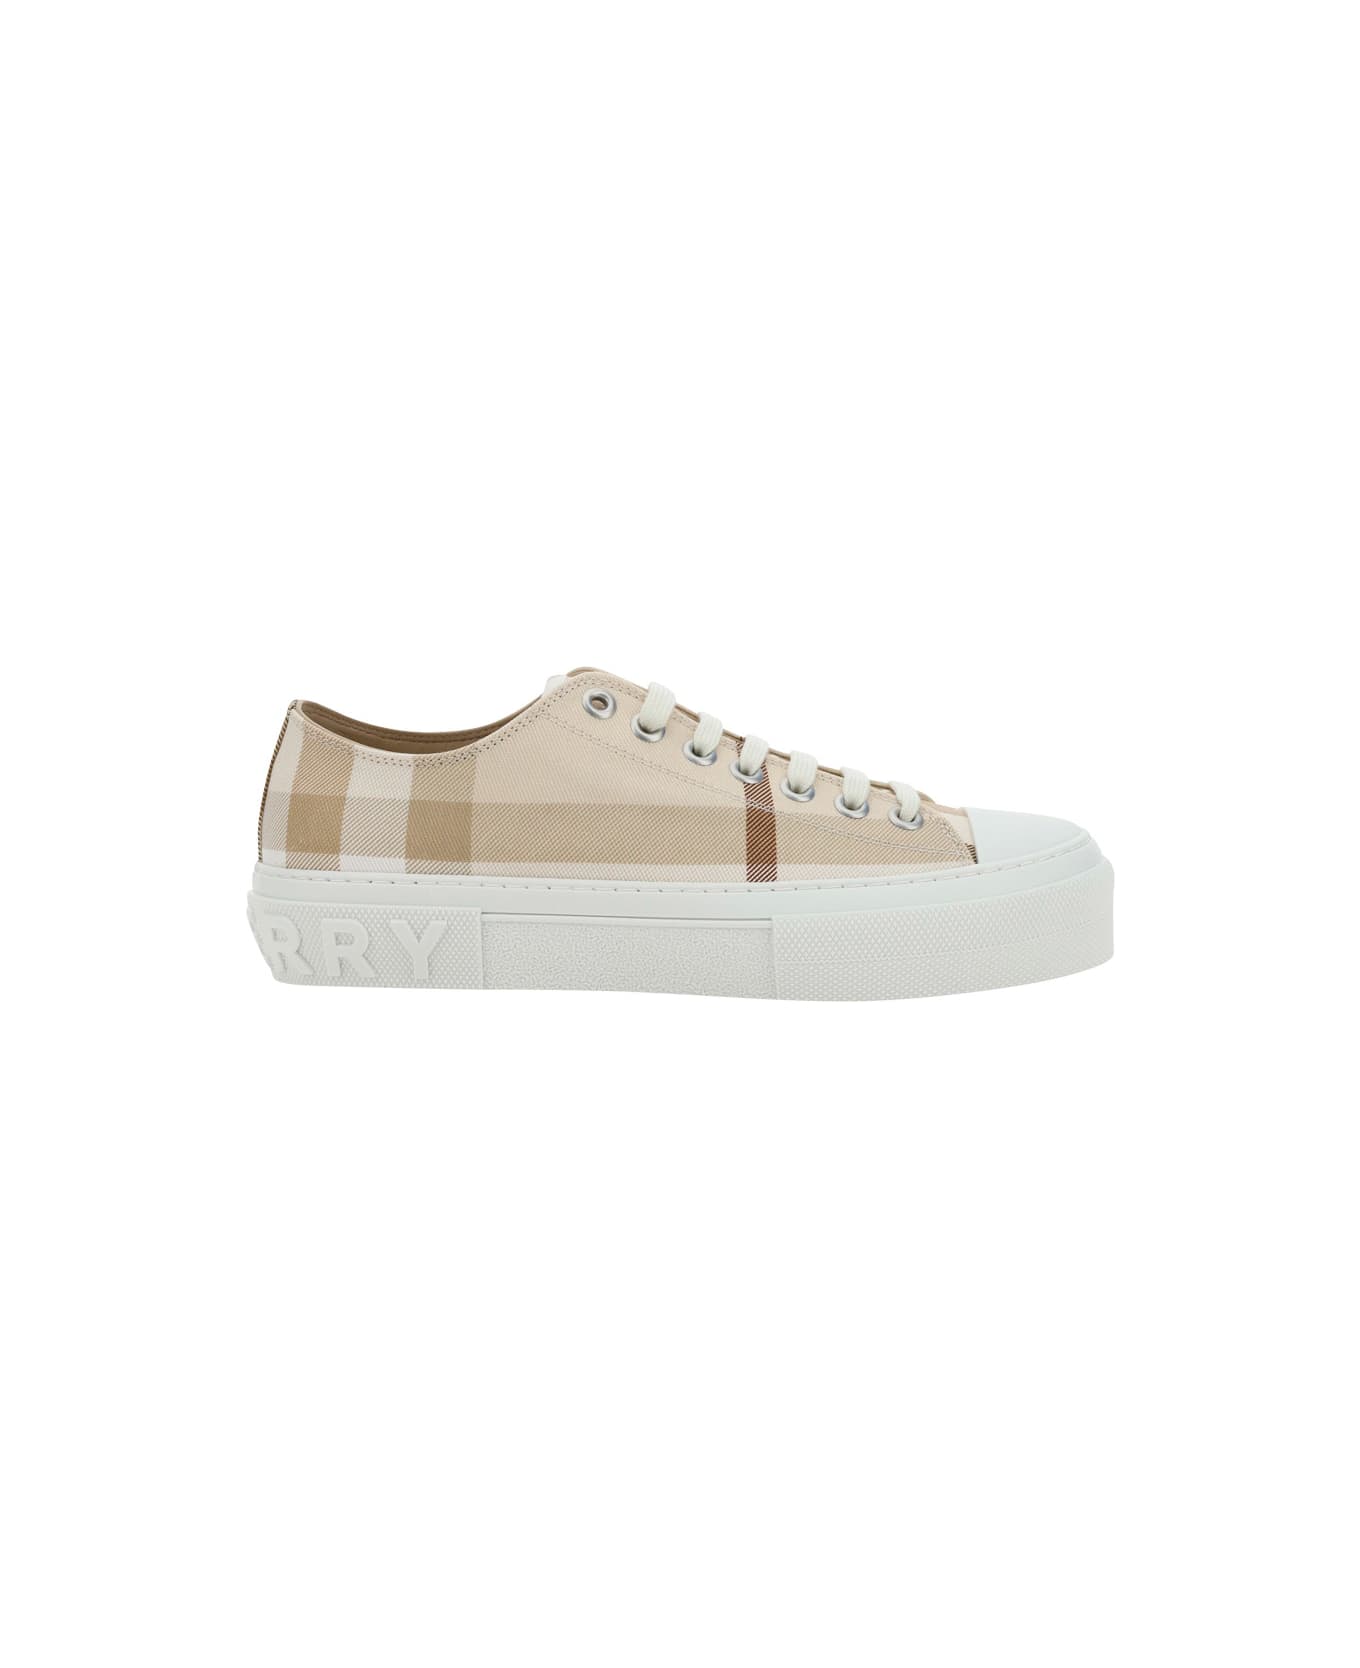 Burberry Jack Sneaker - Soft Fawn